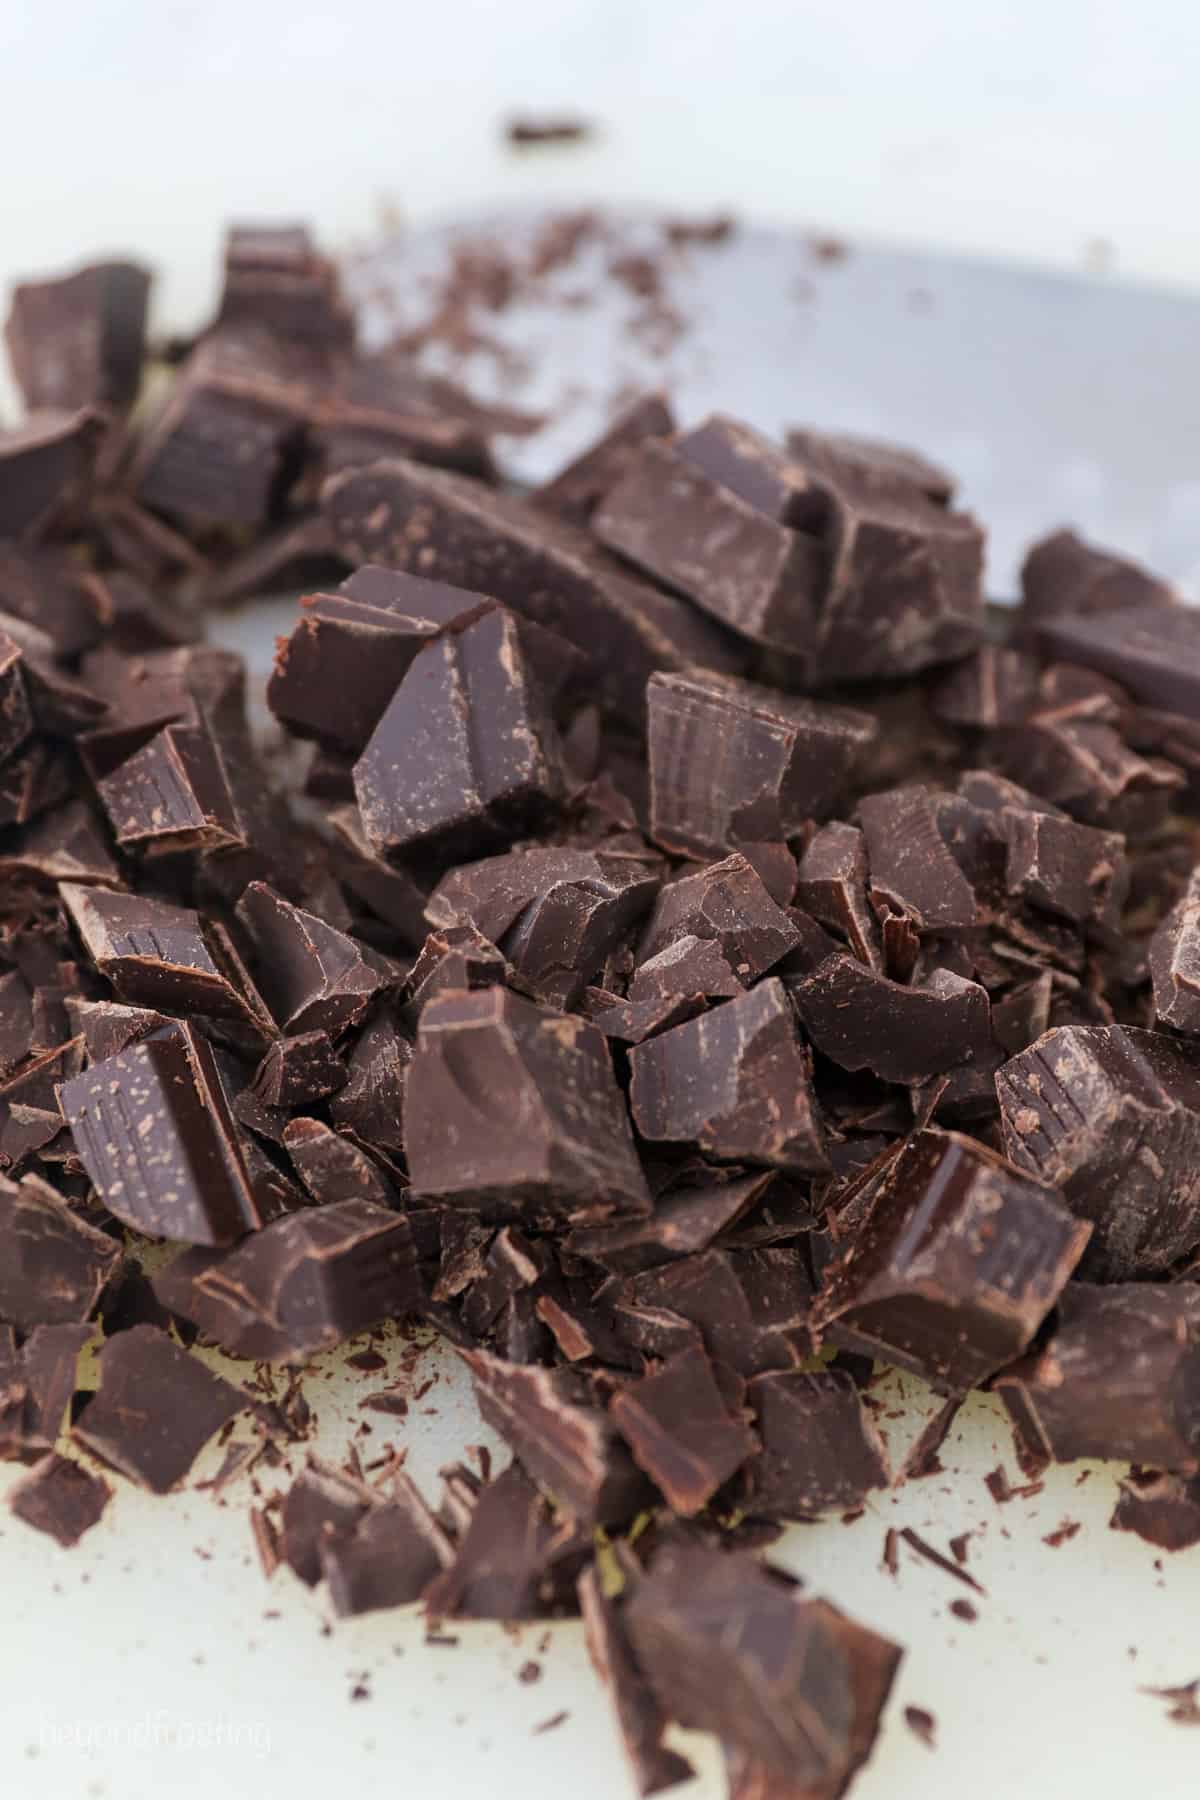 A pile of chopped chocolate pieces.